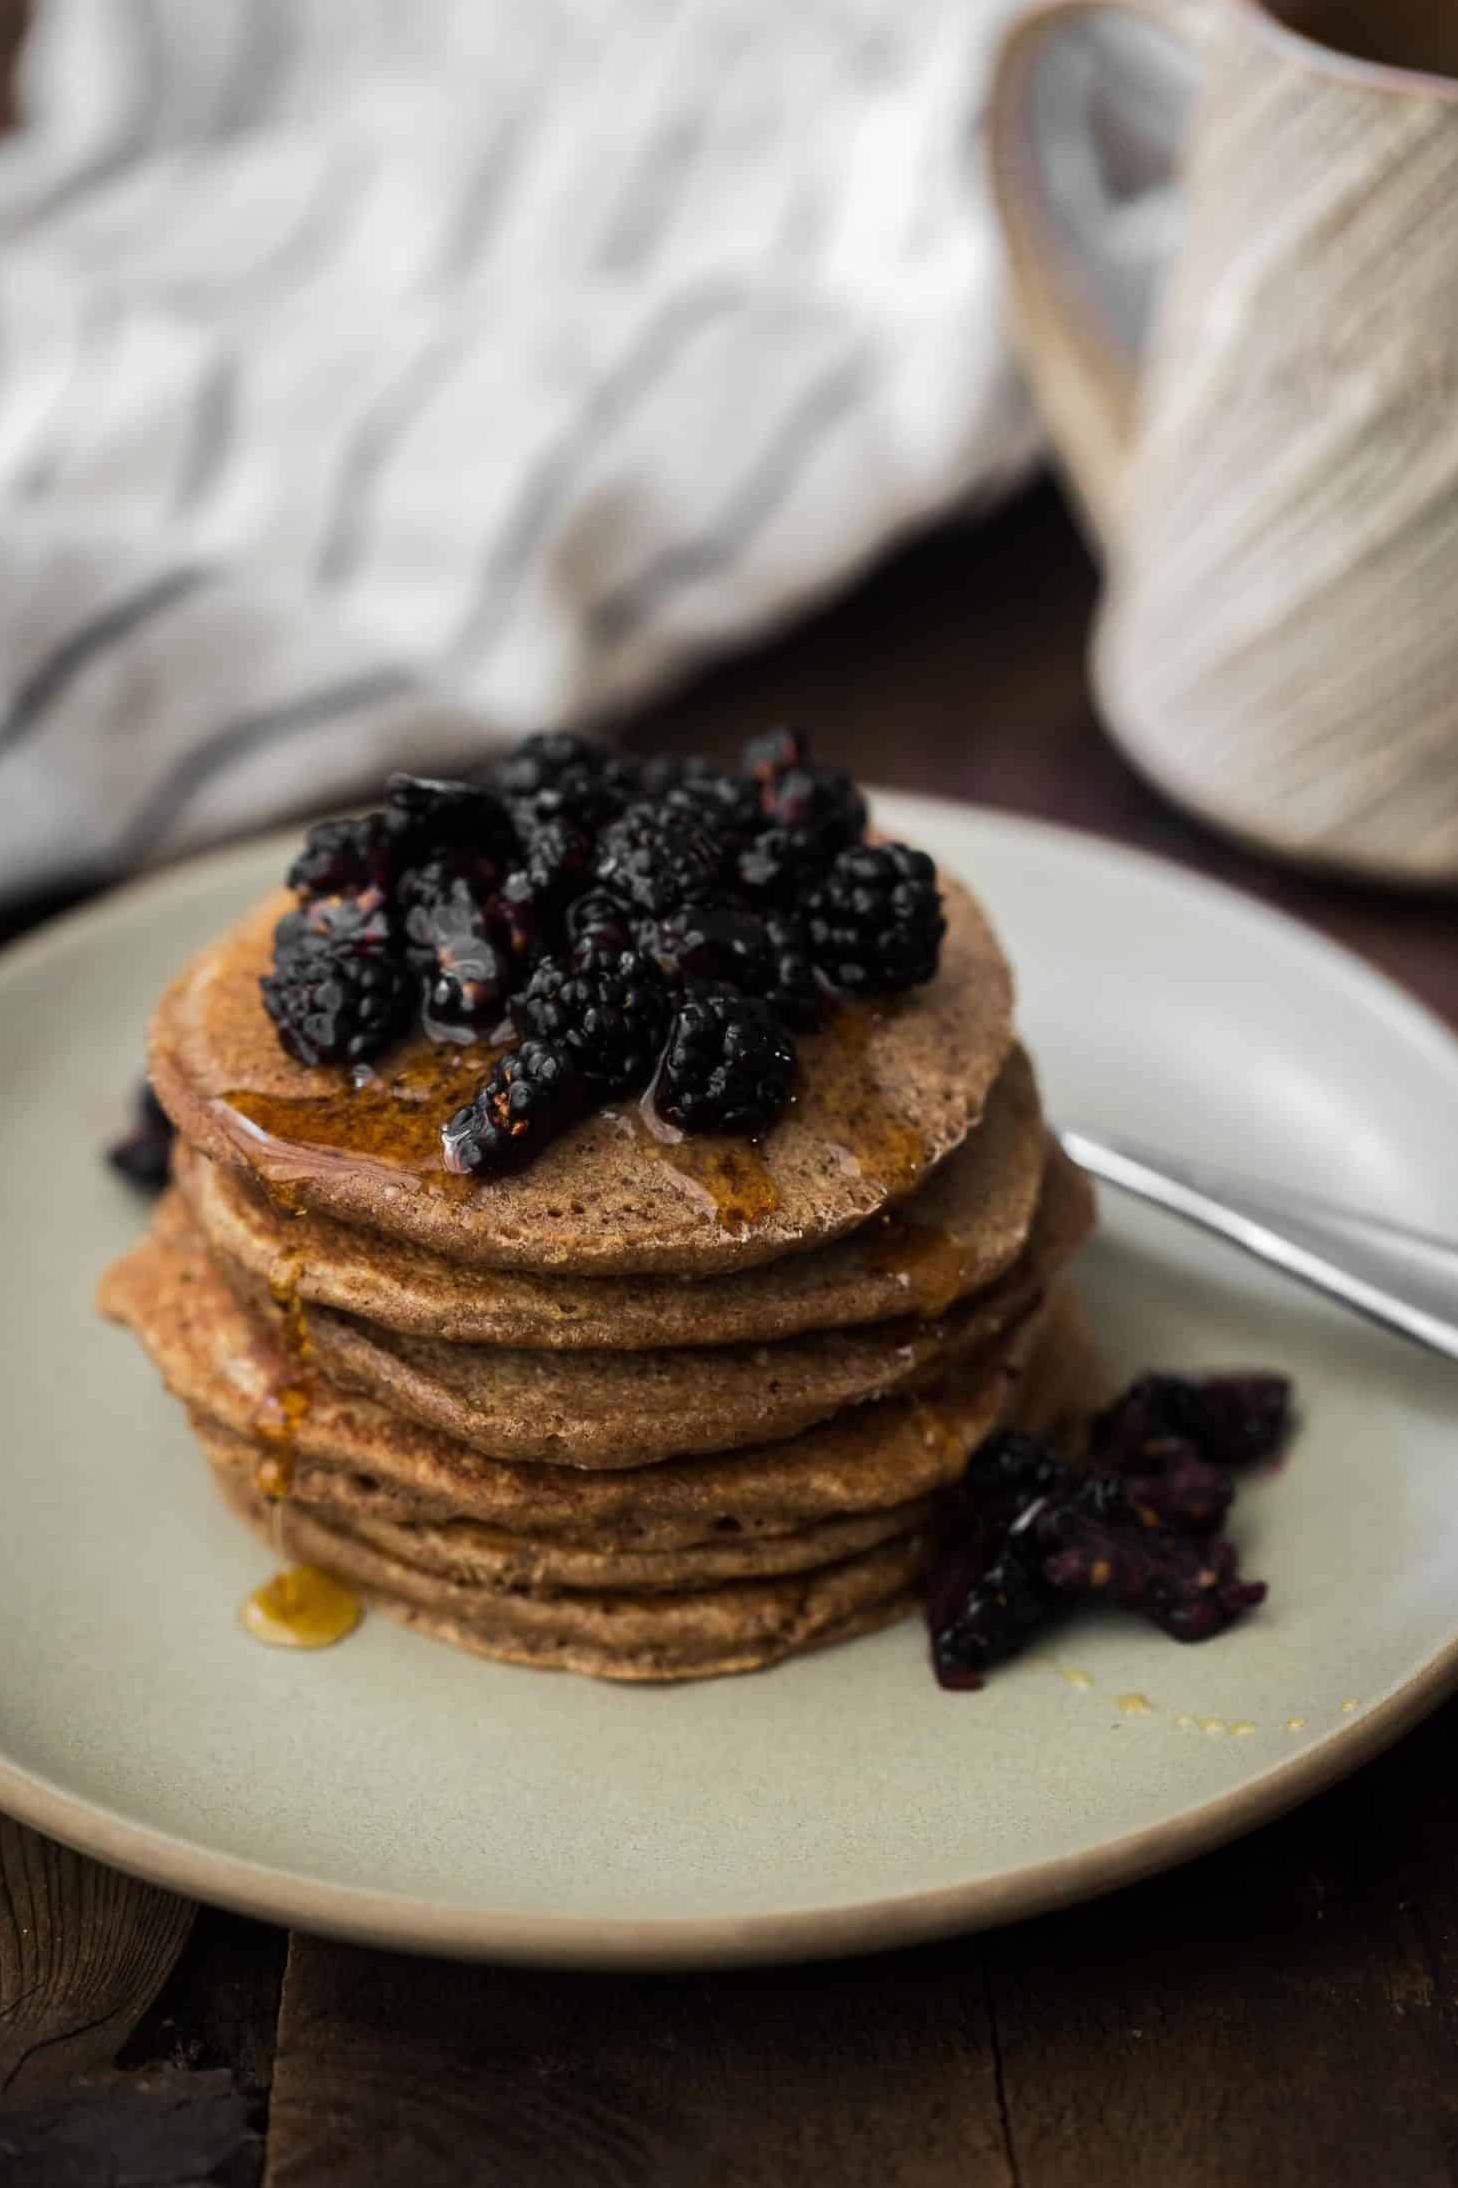  These teff pancakes are like a warm hug in a plate.